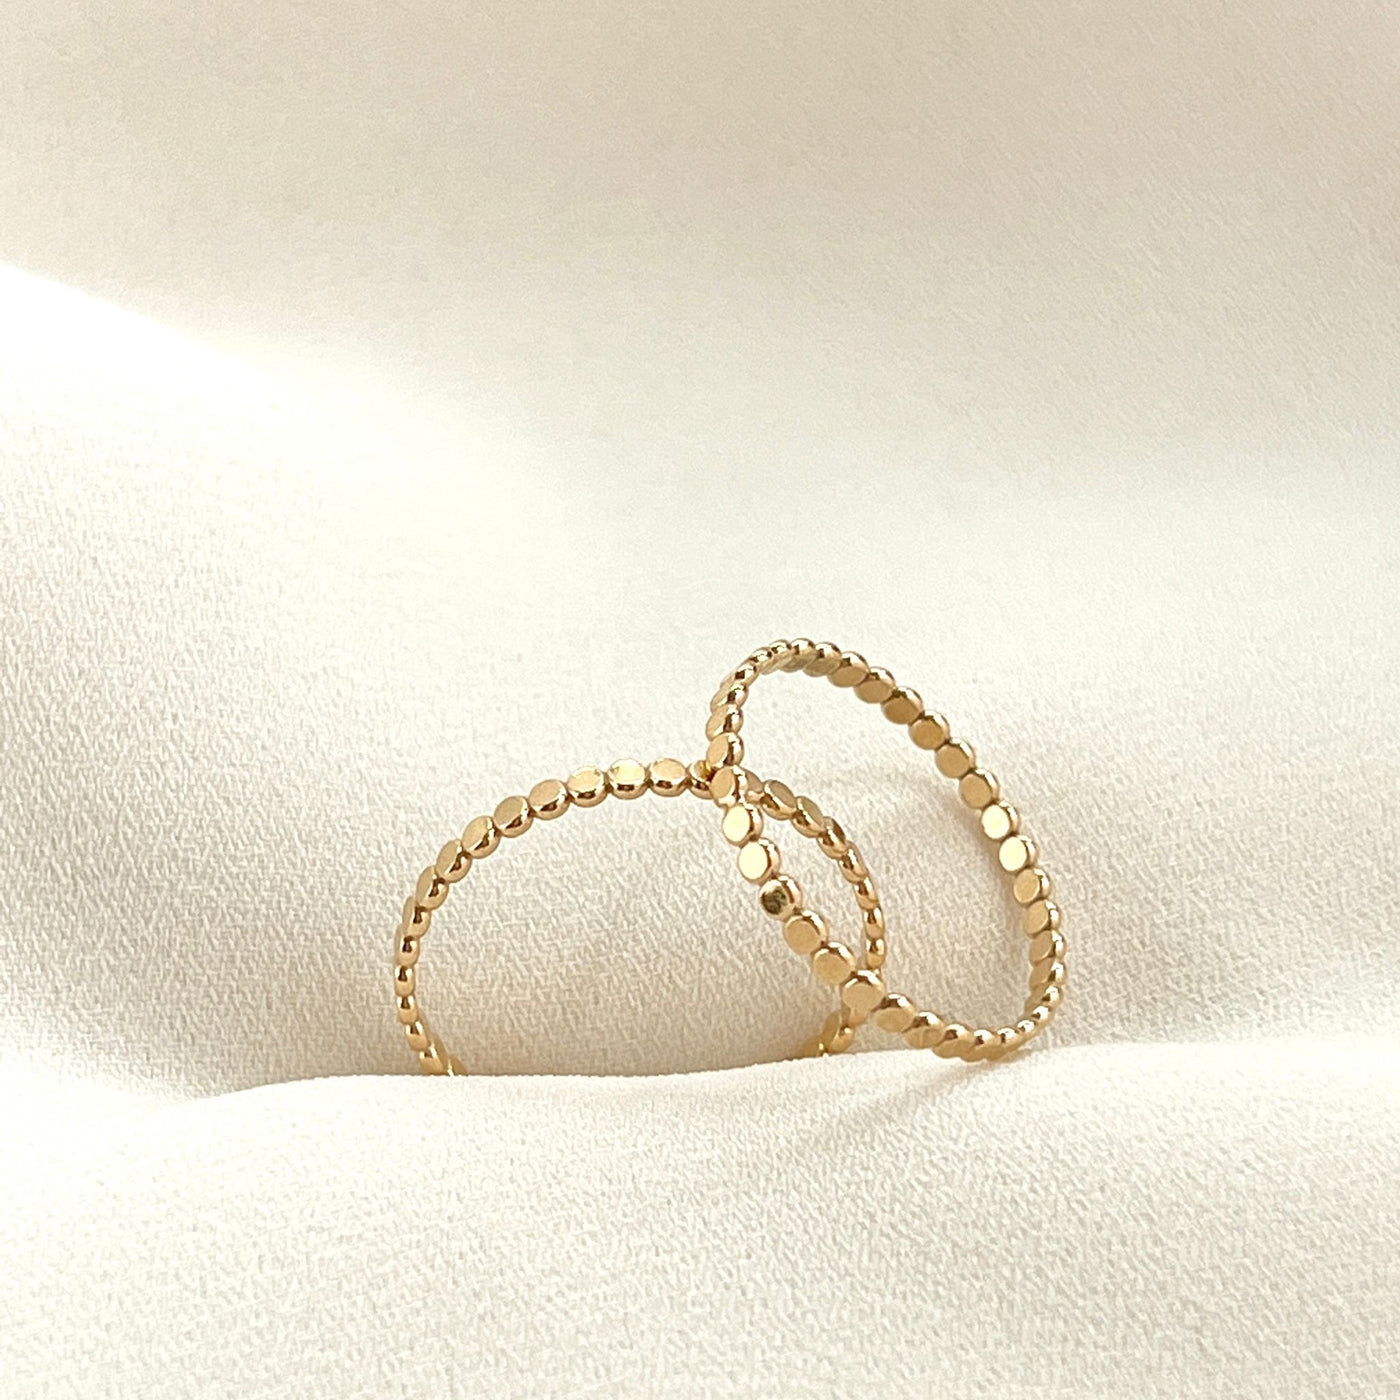 14K Gold filled dot ring on cream coloured background. The dot ring is a series of uniform gold circles joined together to create a circle finger ring. Highly polished giving a glorious shine  Edit alt text